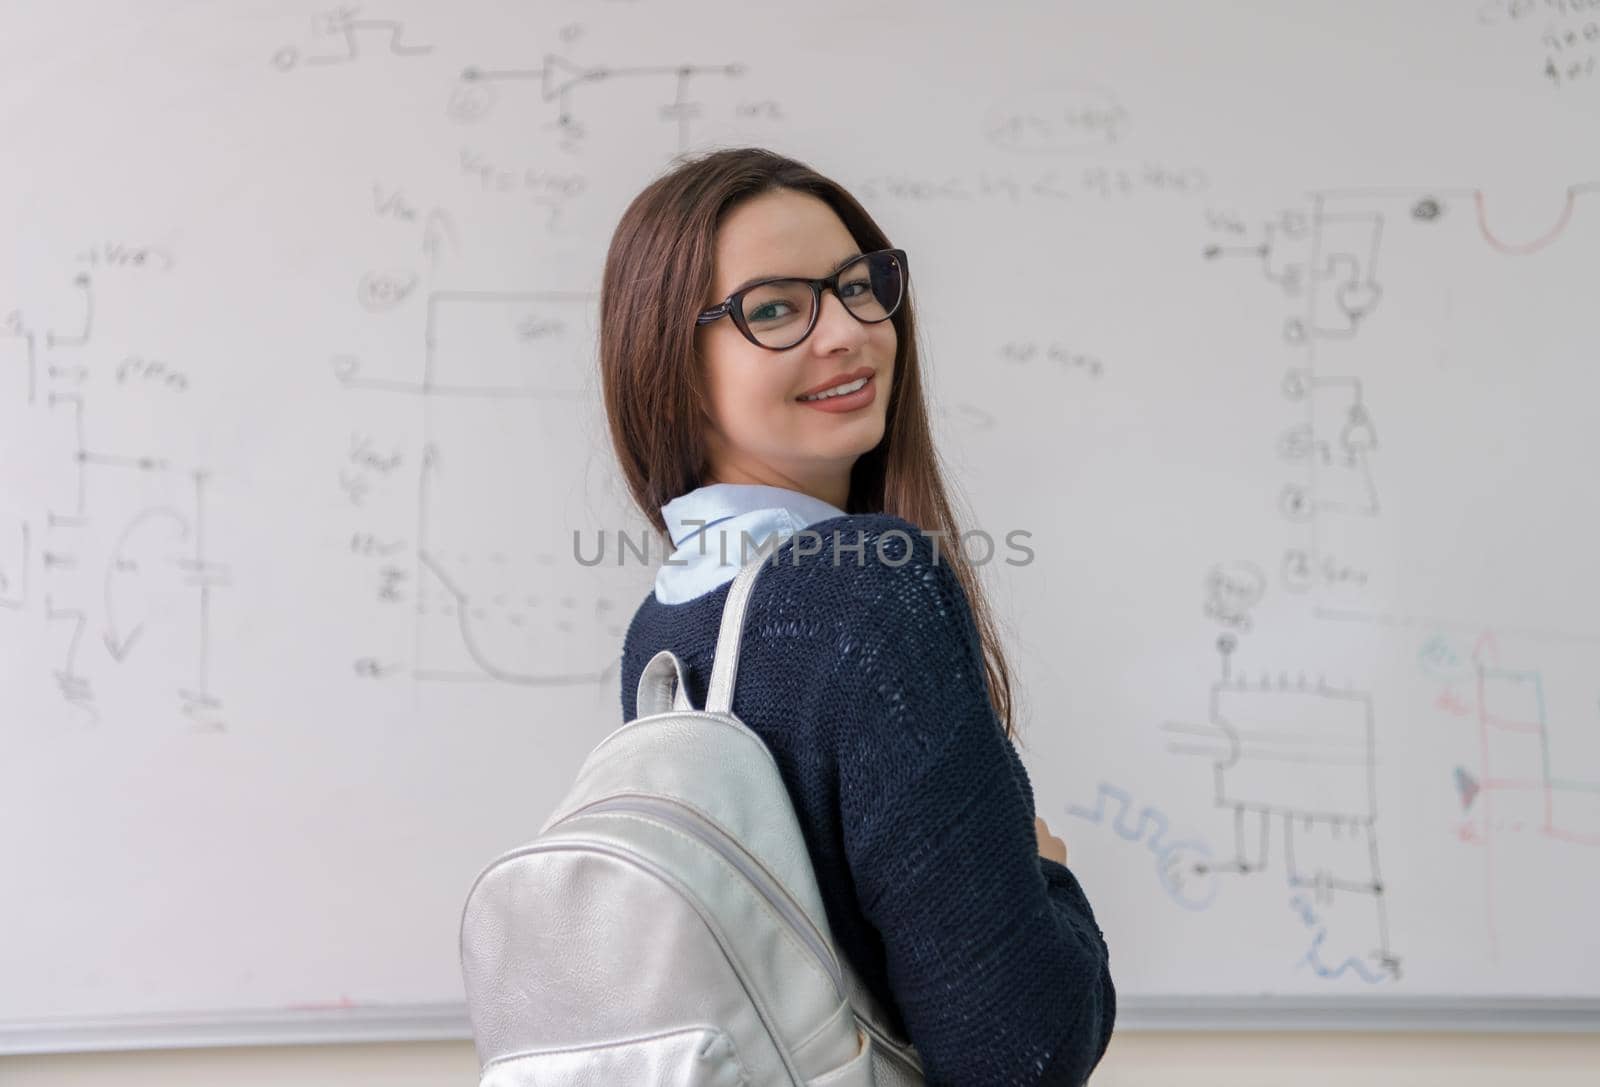 portrait of a young beautiful female student standing in front of white chalkboard and looking at the camera